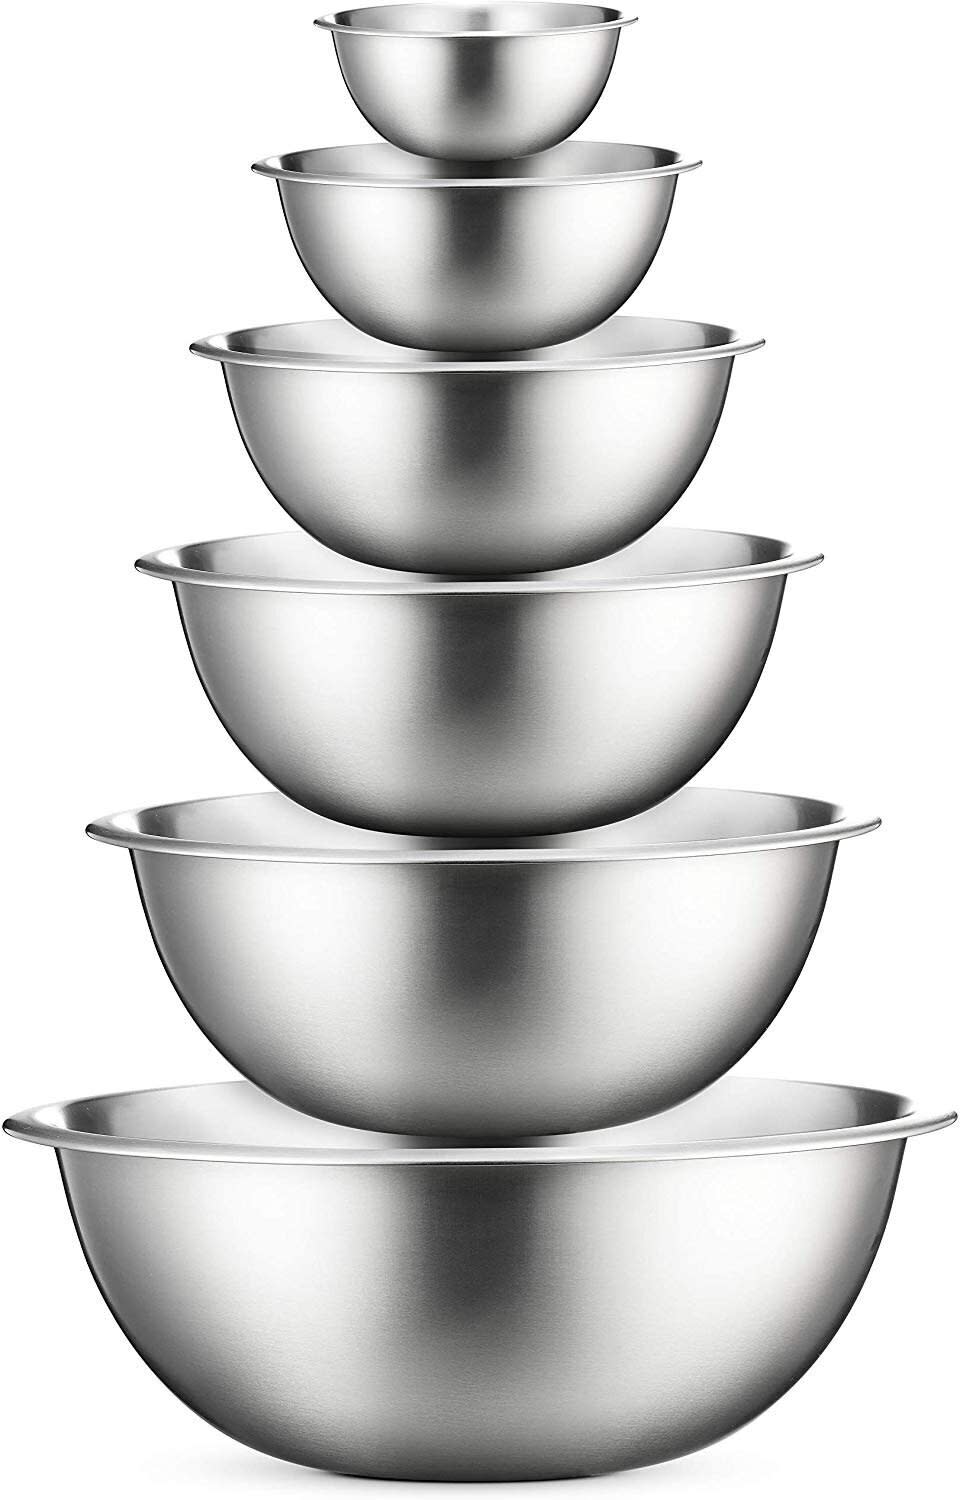 This six-piece set of premium stainless steel mixing bowls has a 4.6-star rating and over 5,000 reviews. Find it for $24 on <a href="https://amzn.to/3auRlhD" target="_blank" rel="noopener noreferrer">Amazon</a>.